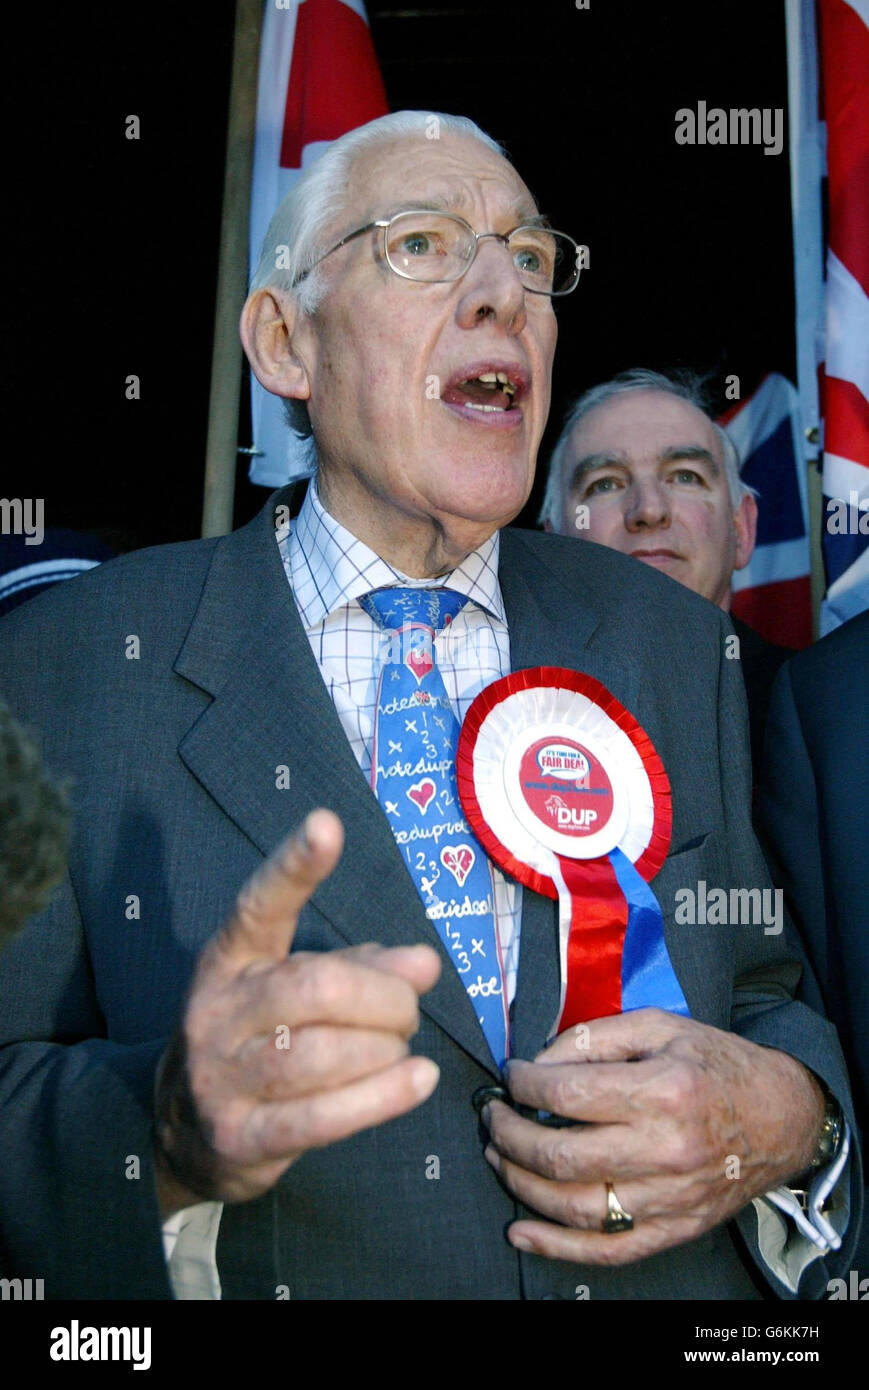 The Rev Ian Paisley, leader of the Democratic Unionist Party, after topping the poll in the North Antrim count at Ballymoney in the Northern Ireland elections. The DUP leader declared today was 'a great day for Ulster'. Stock Photo